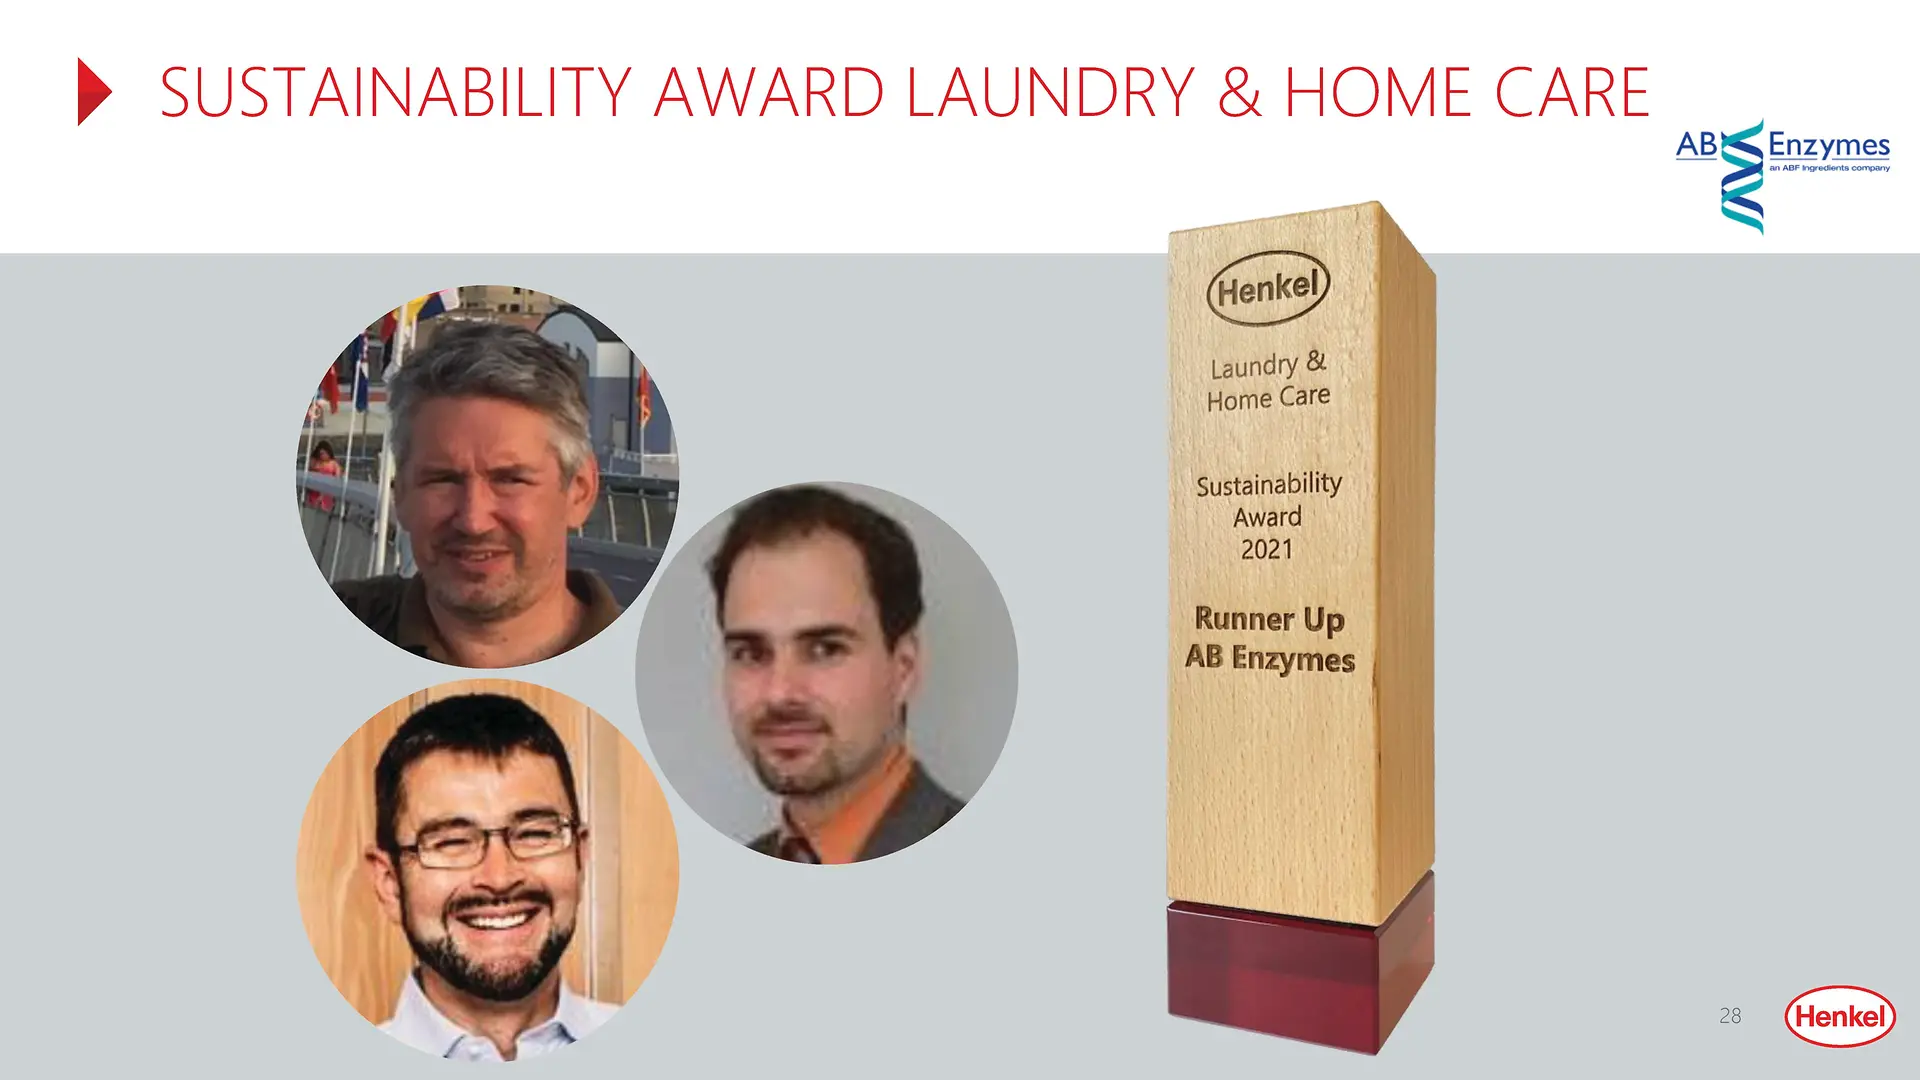 
AB Enzymes won the second prize of Laundry & Home’s “Sustainability Award”.